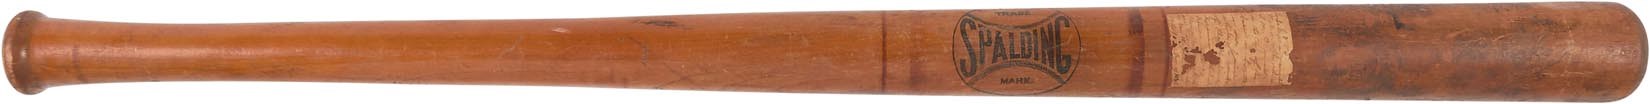 - 1880 Spalding "New Haven" Bat w/Earliest Known Use of the Term Memorabilia (Samuel M. Chase Collection)